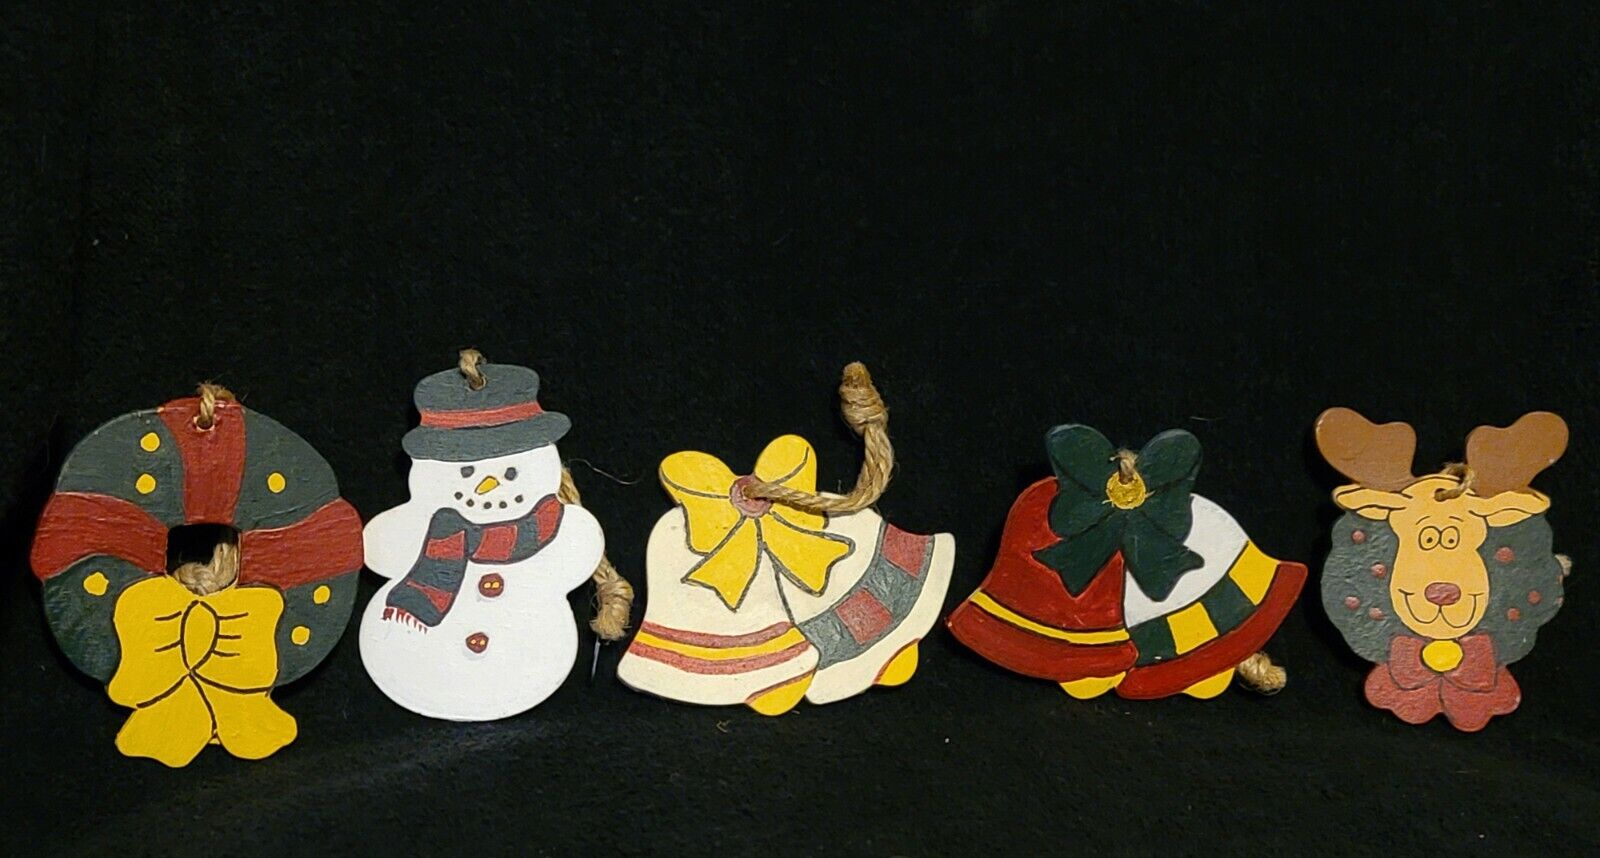 Cute Vintage Hand Painted Wooden Christmas Ornaments - Lot  # 6